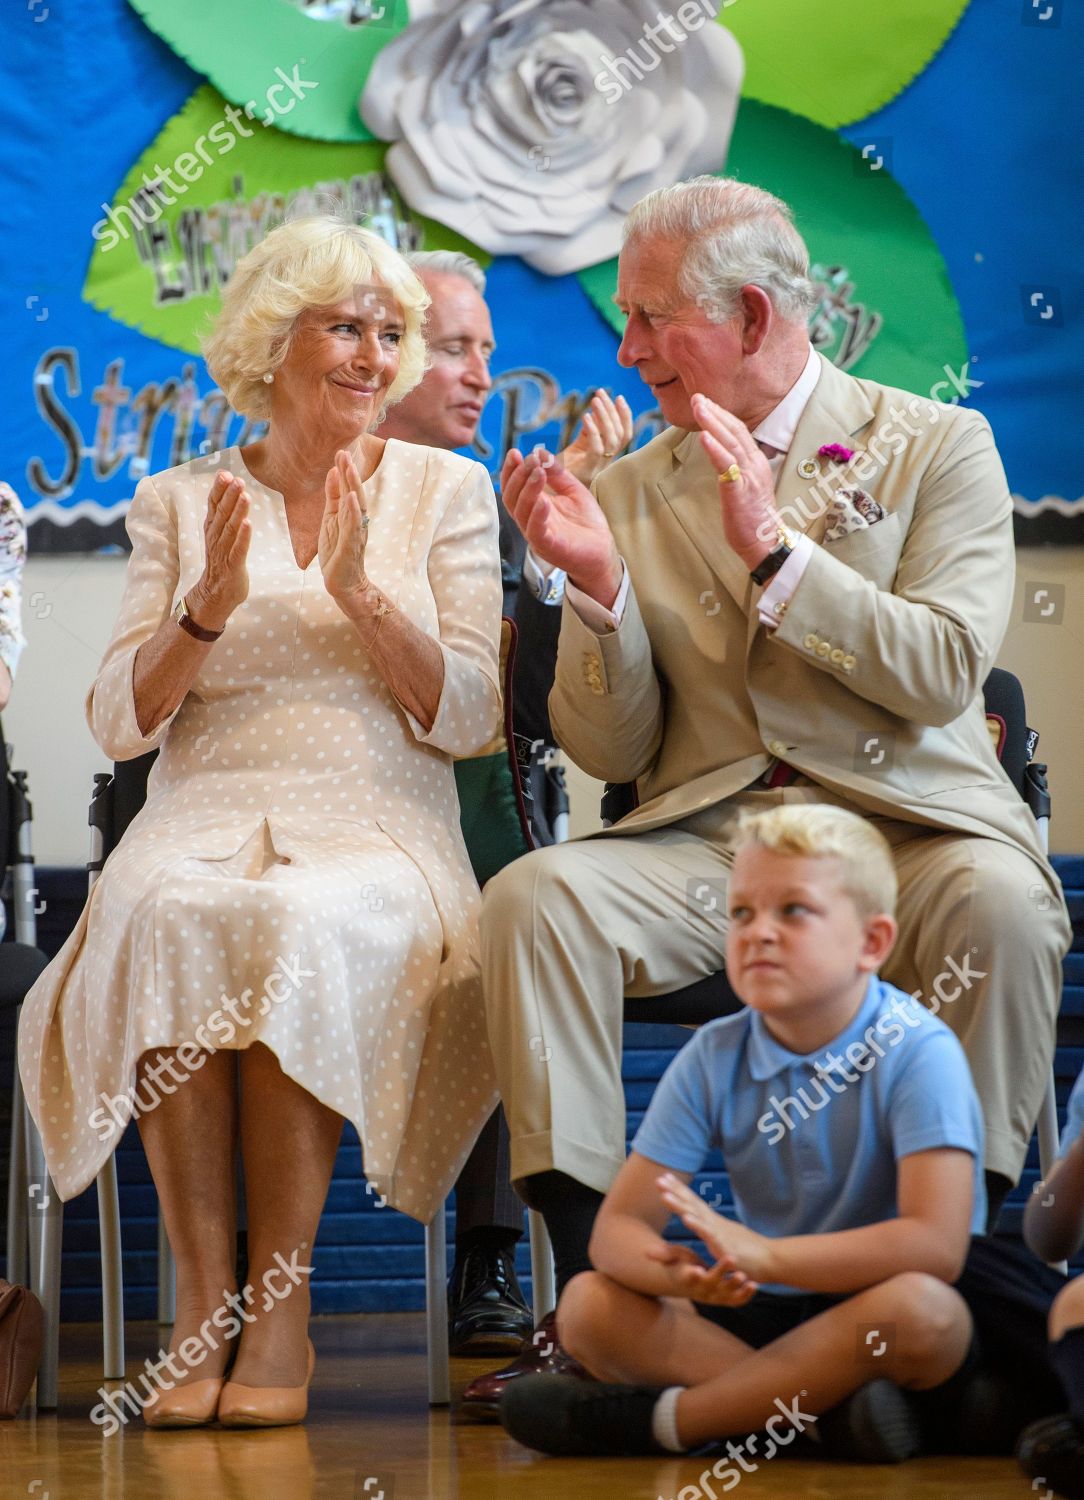 prince-charles-and-camilla-duchess-of-cornwall-visit-to-wales-uk-shutterstock-editorial-10327726ch.jpg